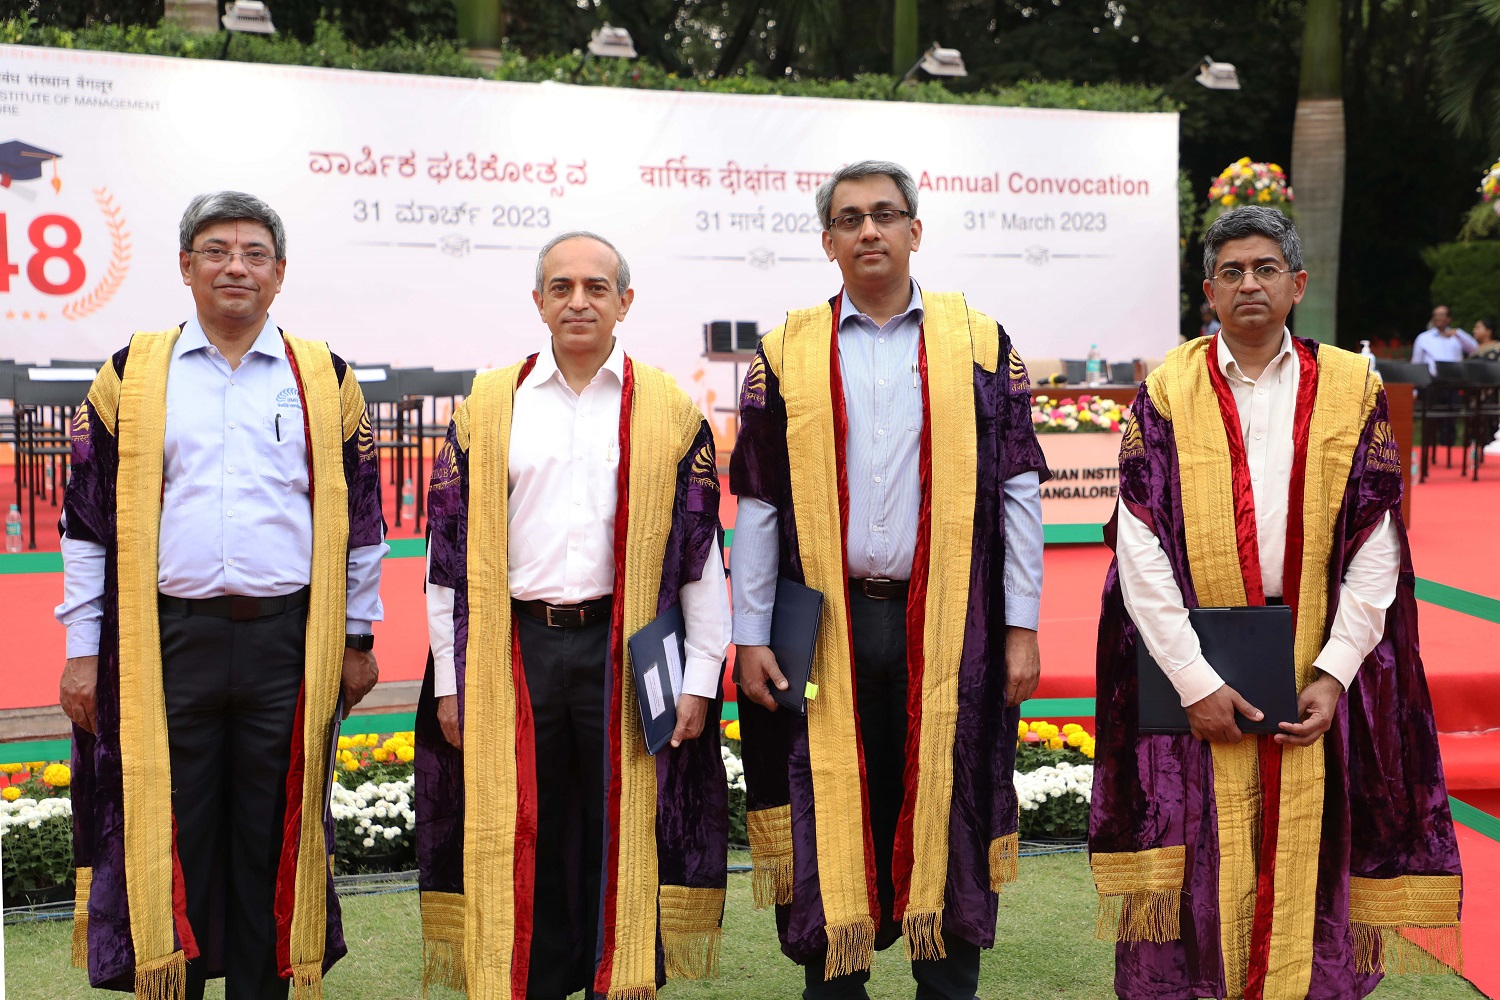 (L-R) Prof. R Srinivasan, Chairperson, PGP & PGP-BA; Prof. Ashok Thampy, Chairperson, EPGP; Prof. Allen P Ugargol, Chairperson, PGPEM; and Prof. Ananth Krishnamurthy, Chairperson, PhD programme at IIMB, at the convocation.